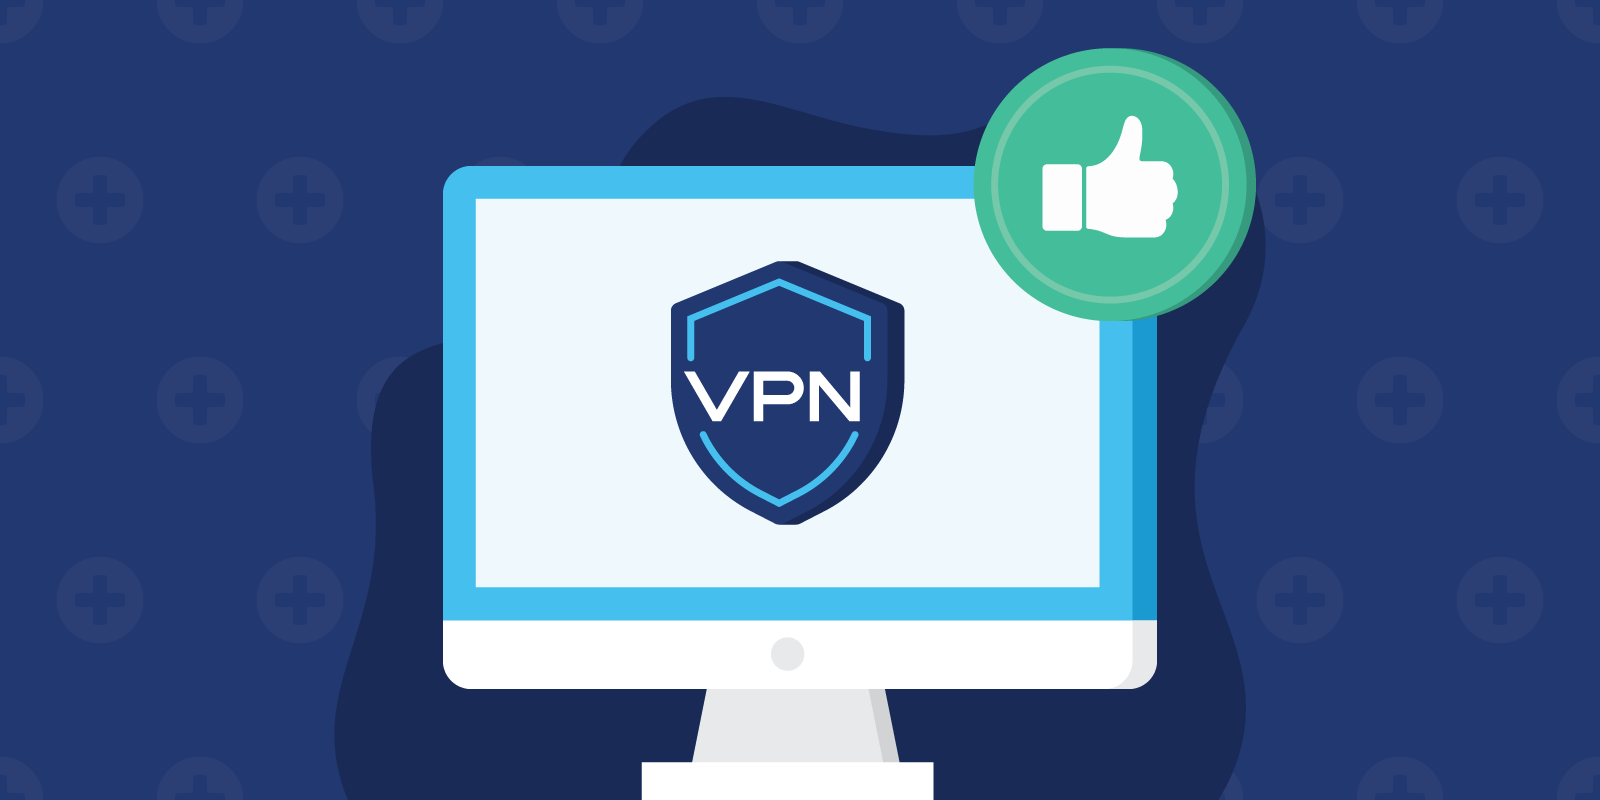 Which VPN is the most secure?